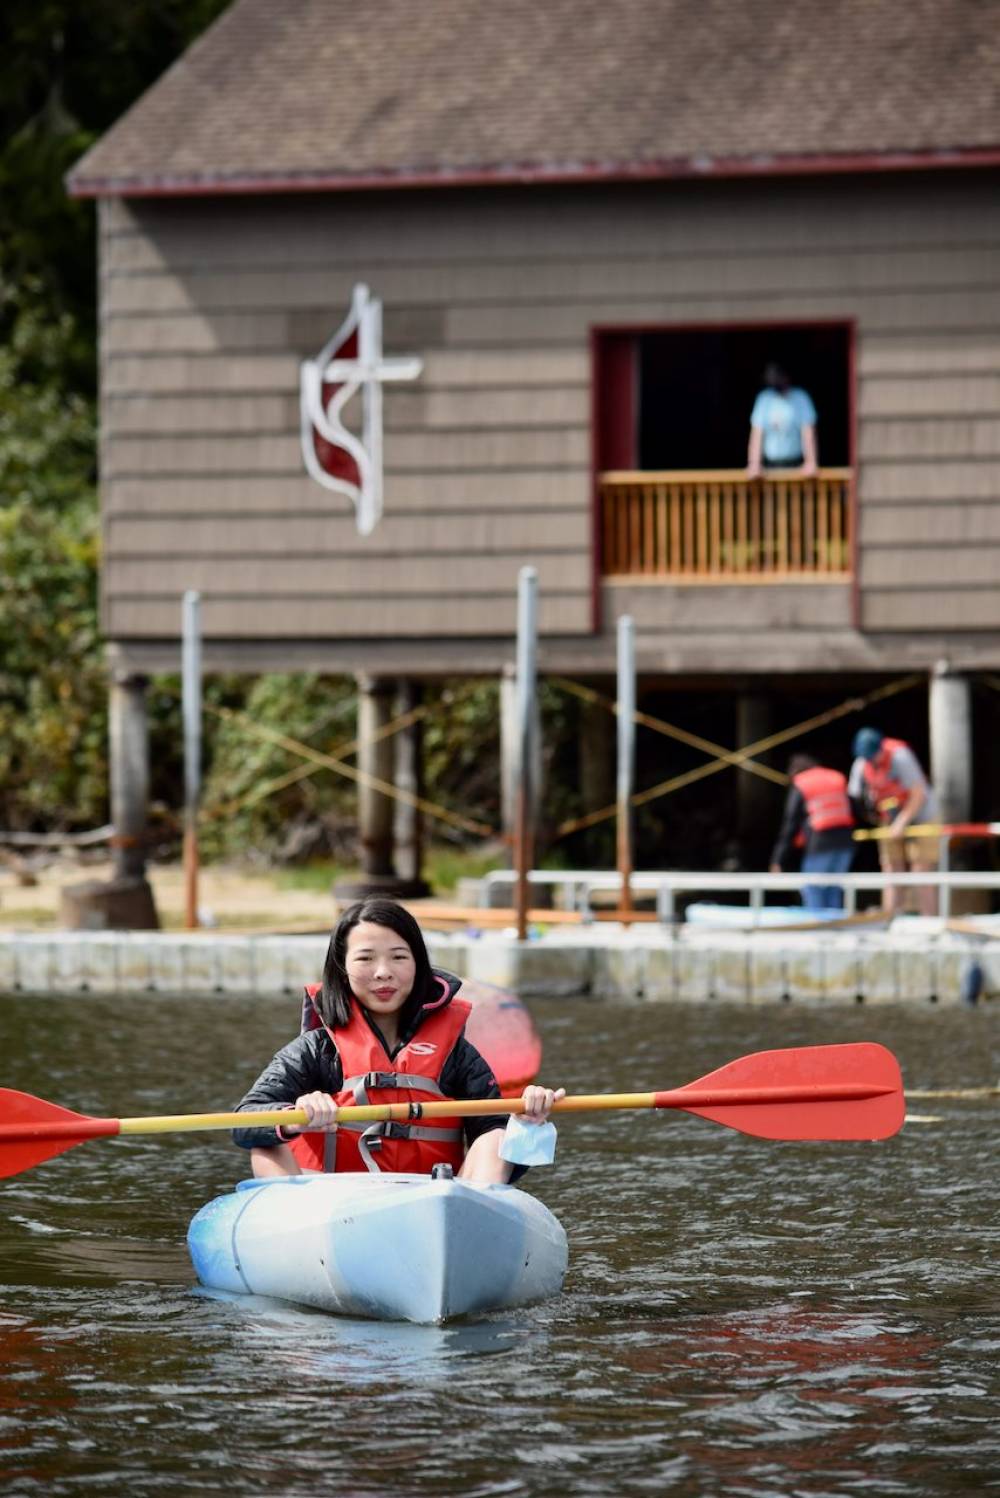 TOP OREGON SWIM CAMP: Camp Magruder is a Top Swim Summer Camp located in Rockaway Beach Oregon offering many fun and enriching Swim and other camp programs. 